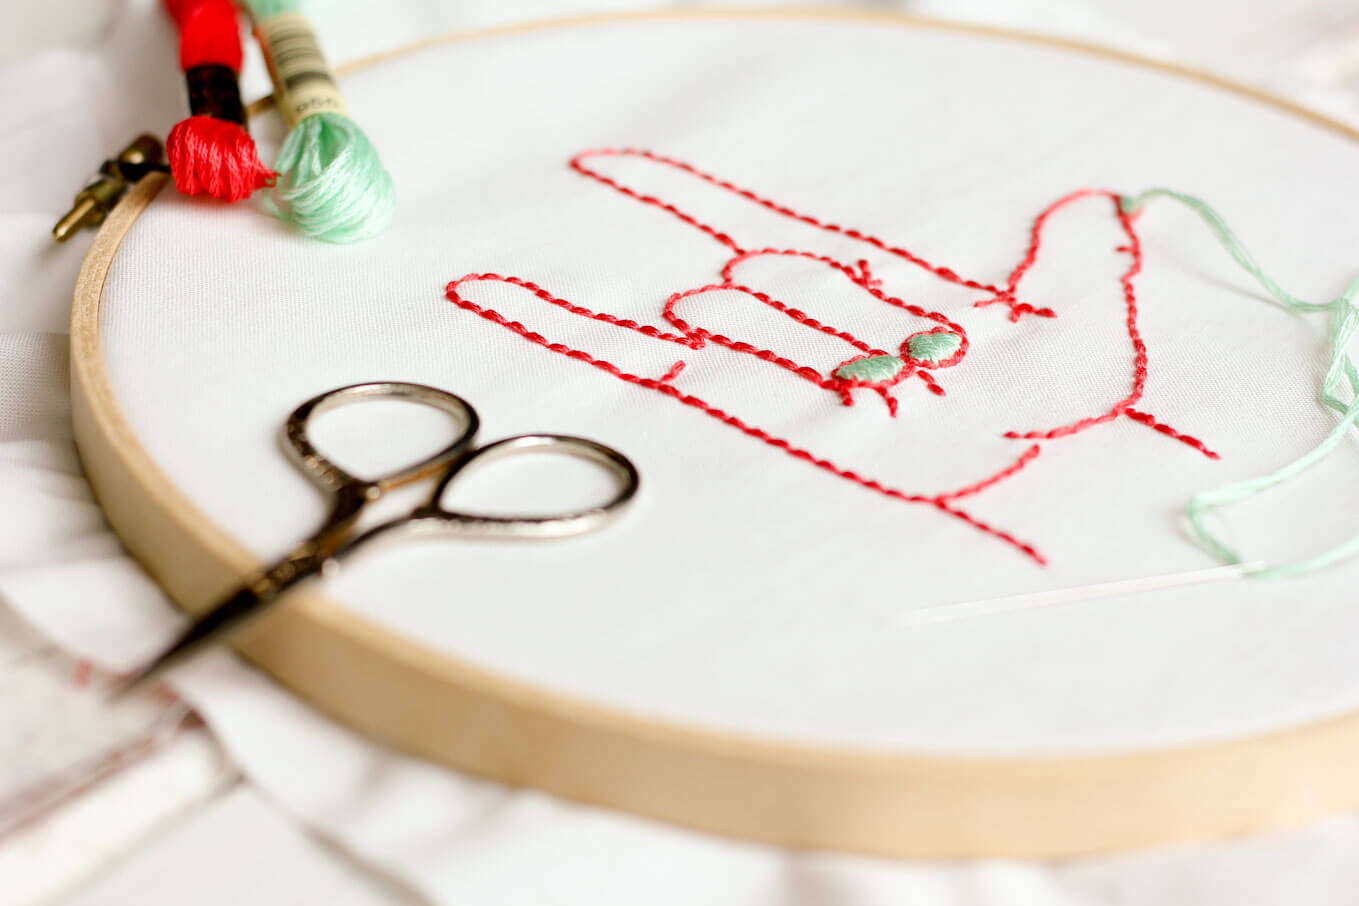 Make Embroidery Pattern I Love You Free Embroidery Pattern Make Do Crew